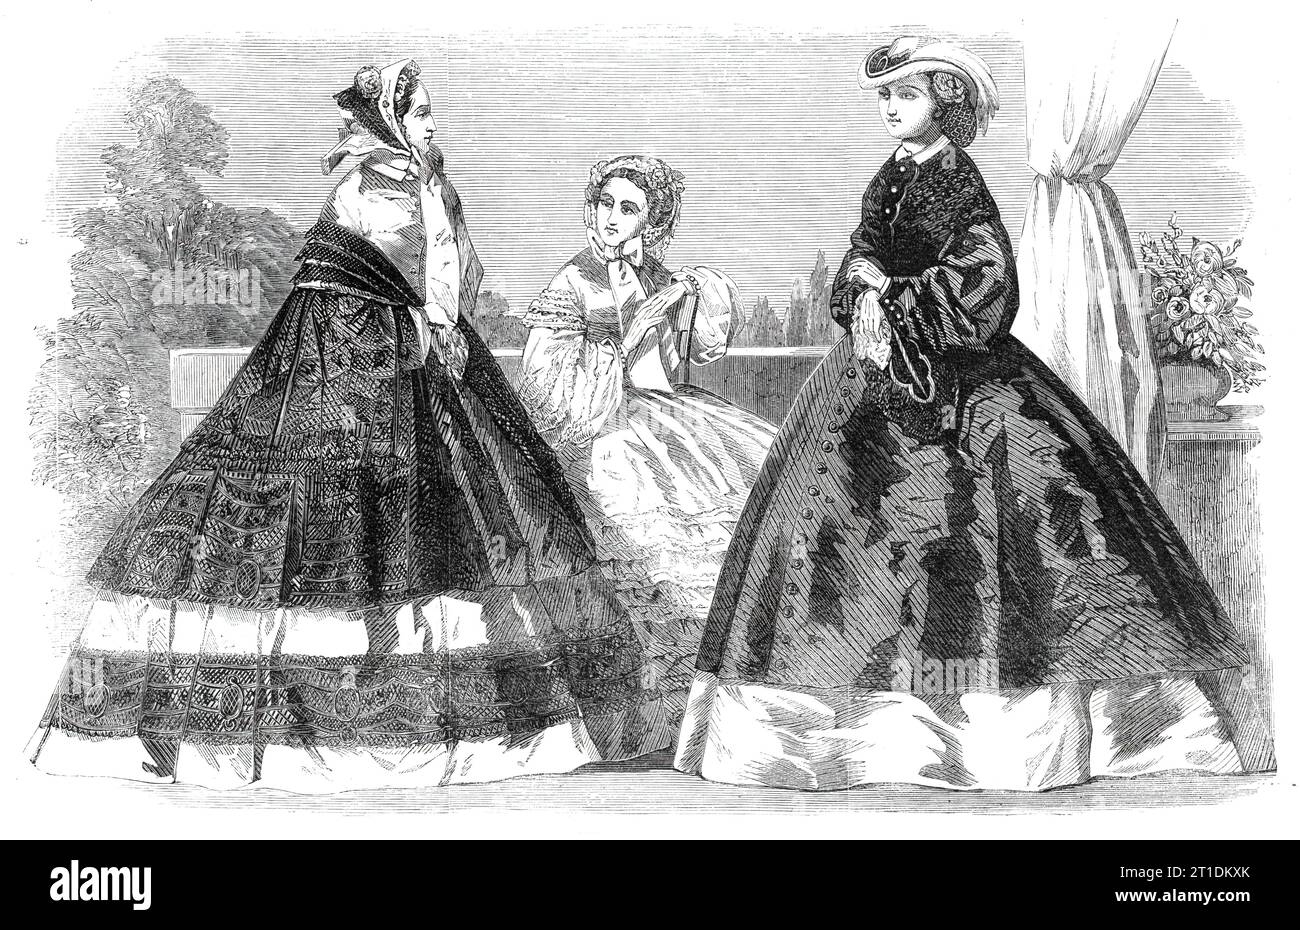 The Paris Fashions for August, 1860. '1. Walking Dress...silk dress trimmed with lace...the mantelet-pelisse is cut square in front, and is composed of two rows of Chantilly lace. The bonnet may either be of straw or crape...surmounted by a small bouquet of flowers. The tour-de-tete consists of tufts of small flowers intermingled with black velvet bows. 2. Visiting Dress. Robe of grenadine gauze, with seven narrow flounces, the upper one surmounted by a frilling corresponding with the trimming on the sleeves, which are wide, and furnished with three rows of frills...The dress is round-waisted, Stock Photo